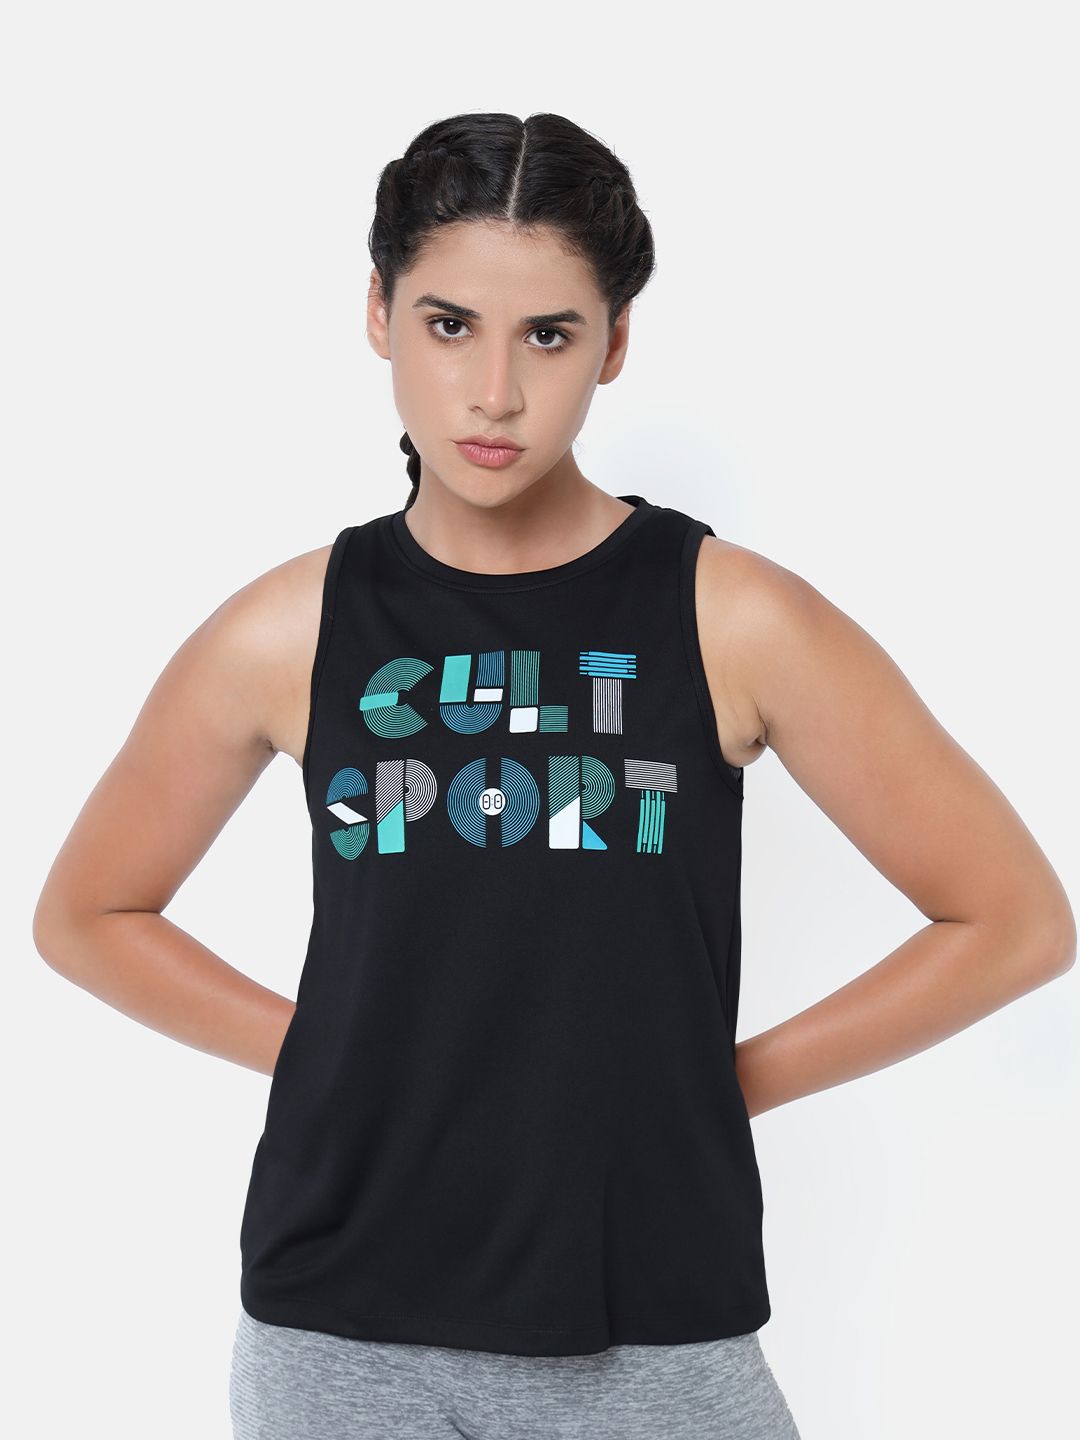 Cultsport Typographic Printed Sleeveless Tank Top Price in India